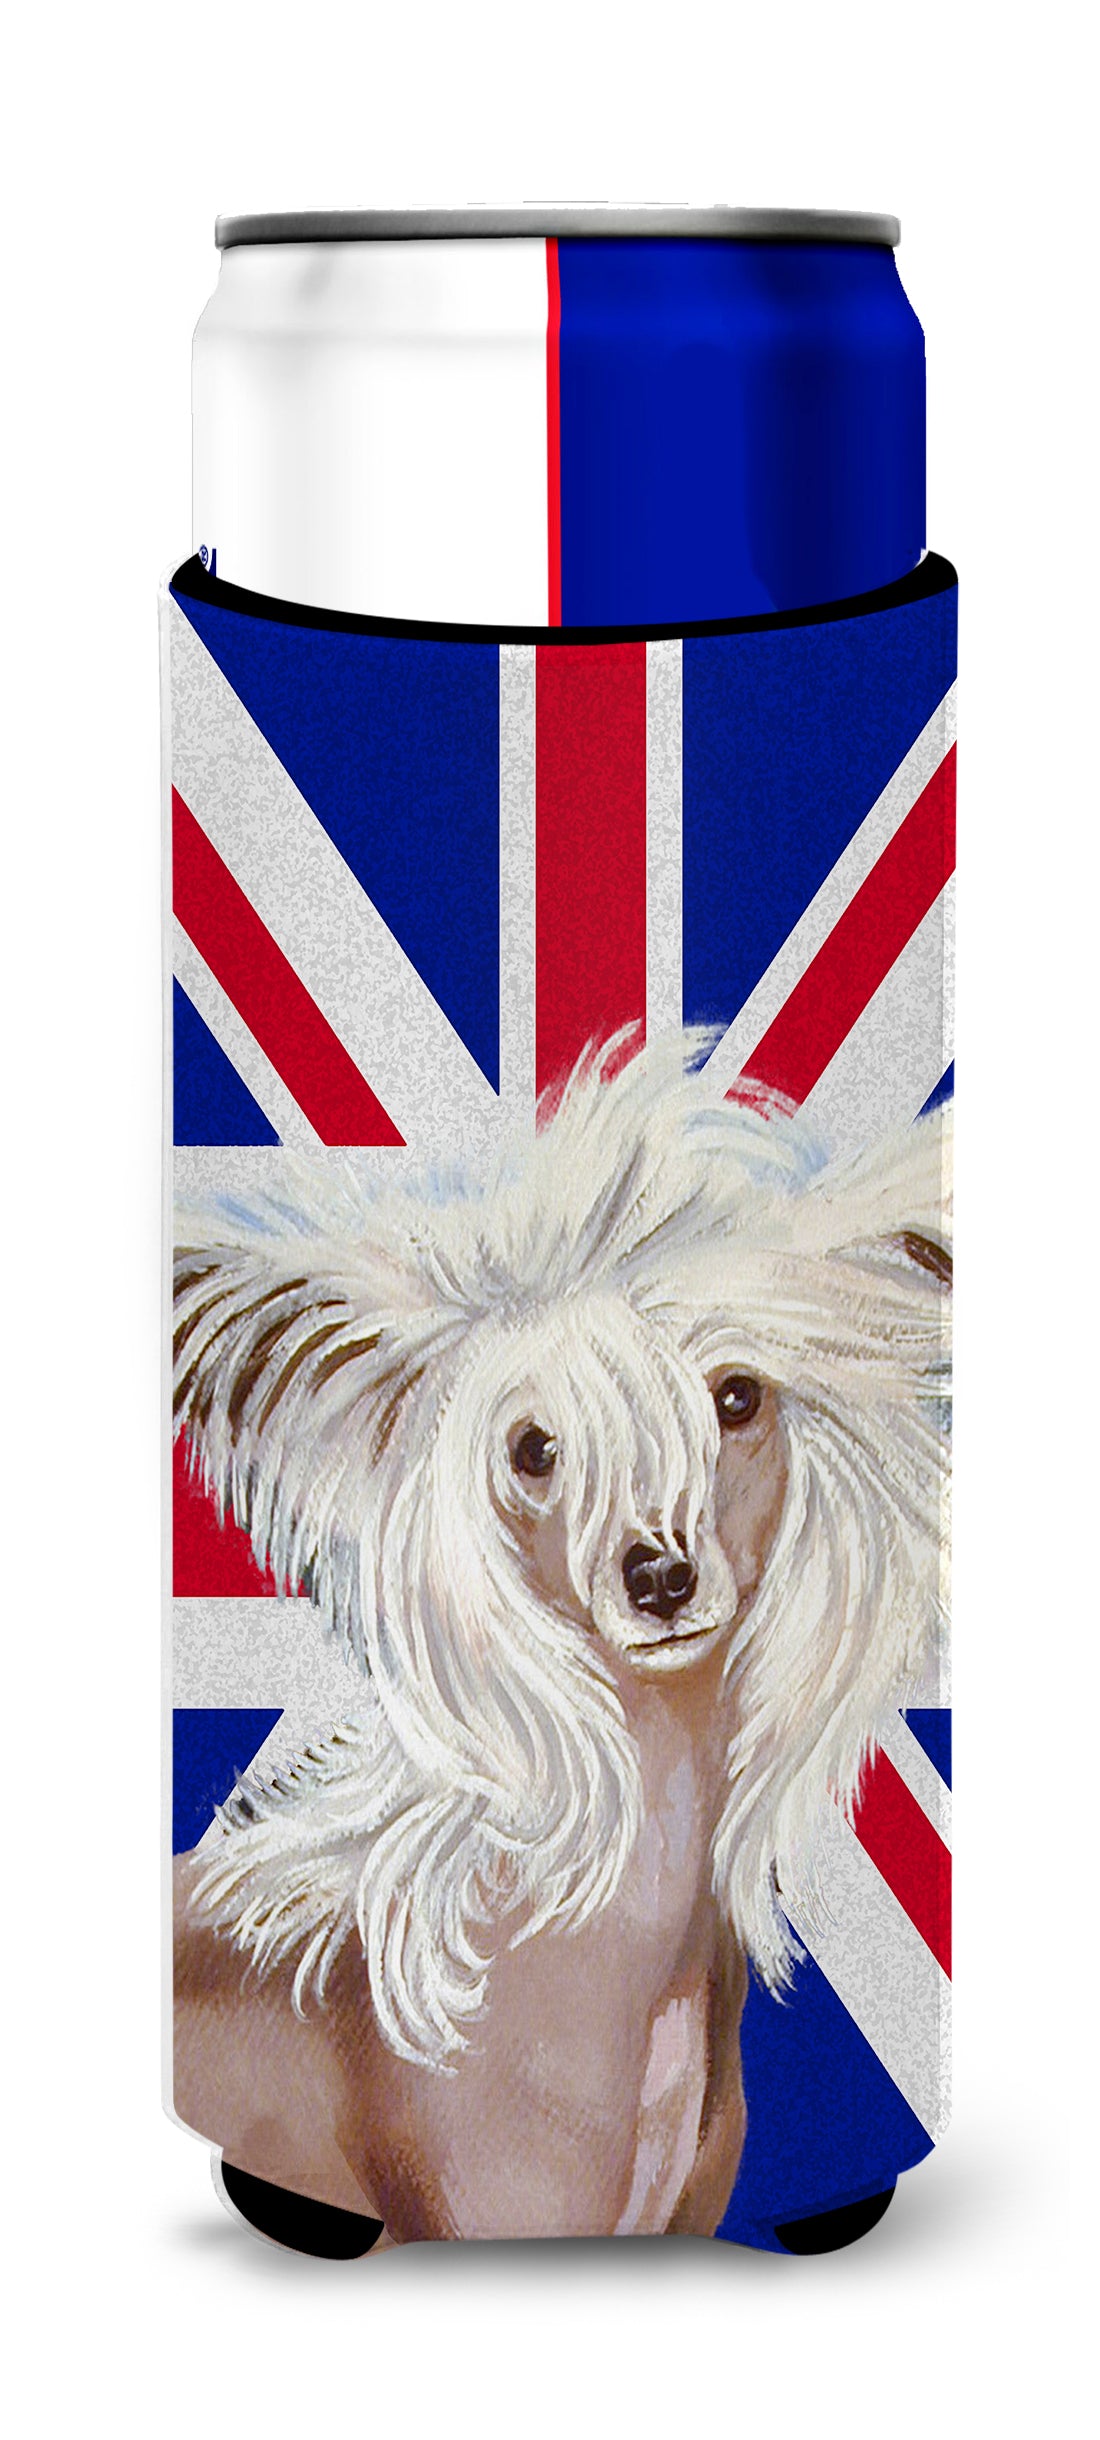 Chinese Crested with English Union Jack British Flag Ultra Beverage Insulators for slim cans LH9501MUK.